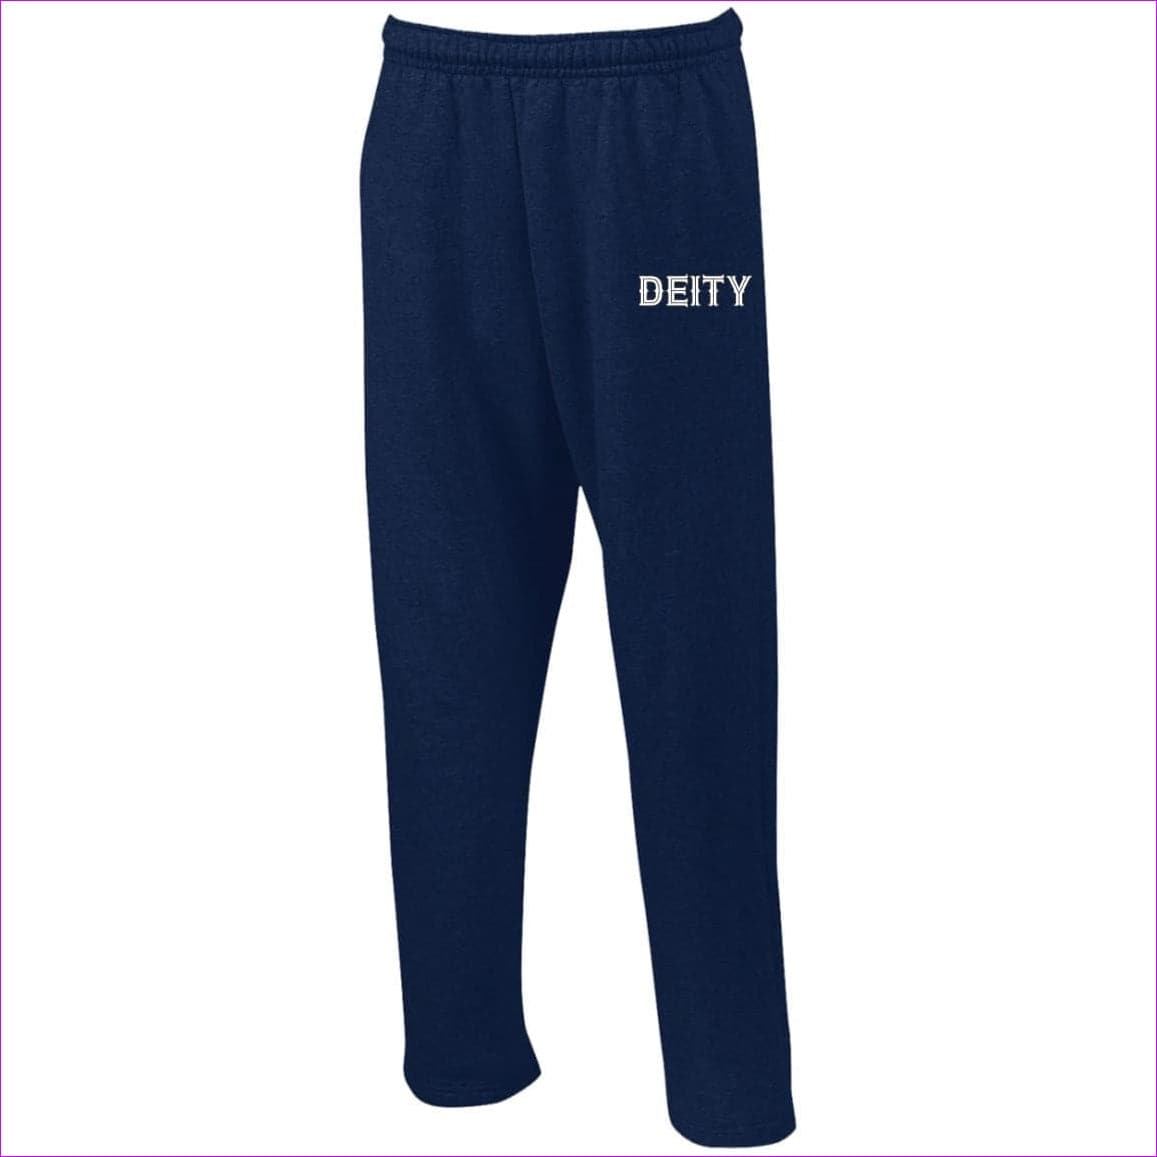 Navy - Deity Open Bottom Sweatpants with Pockets - unisex sweatpants at TFC&H Co.